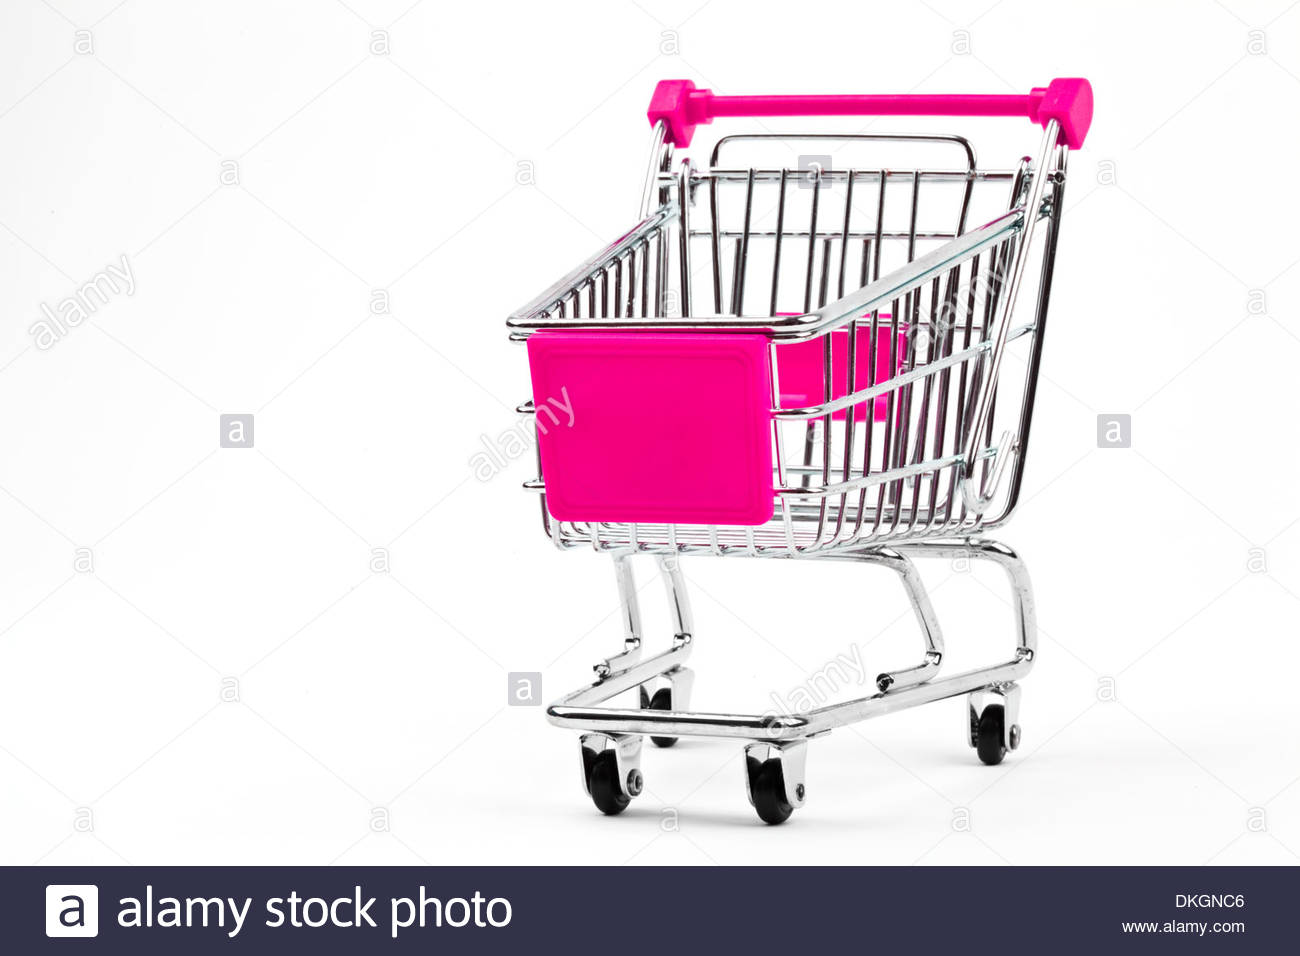 Shopping Trolley Over A Plain White Background Stock Photo